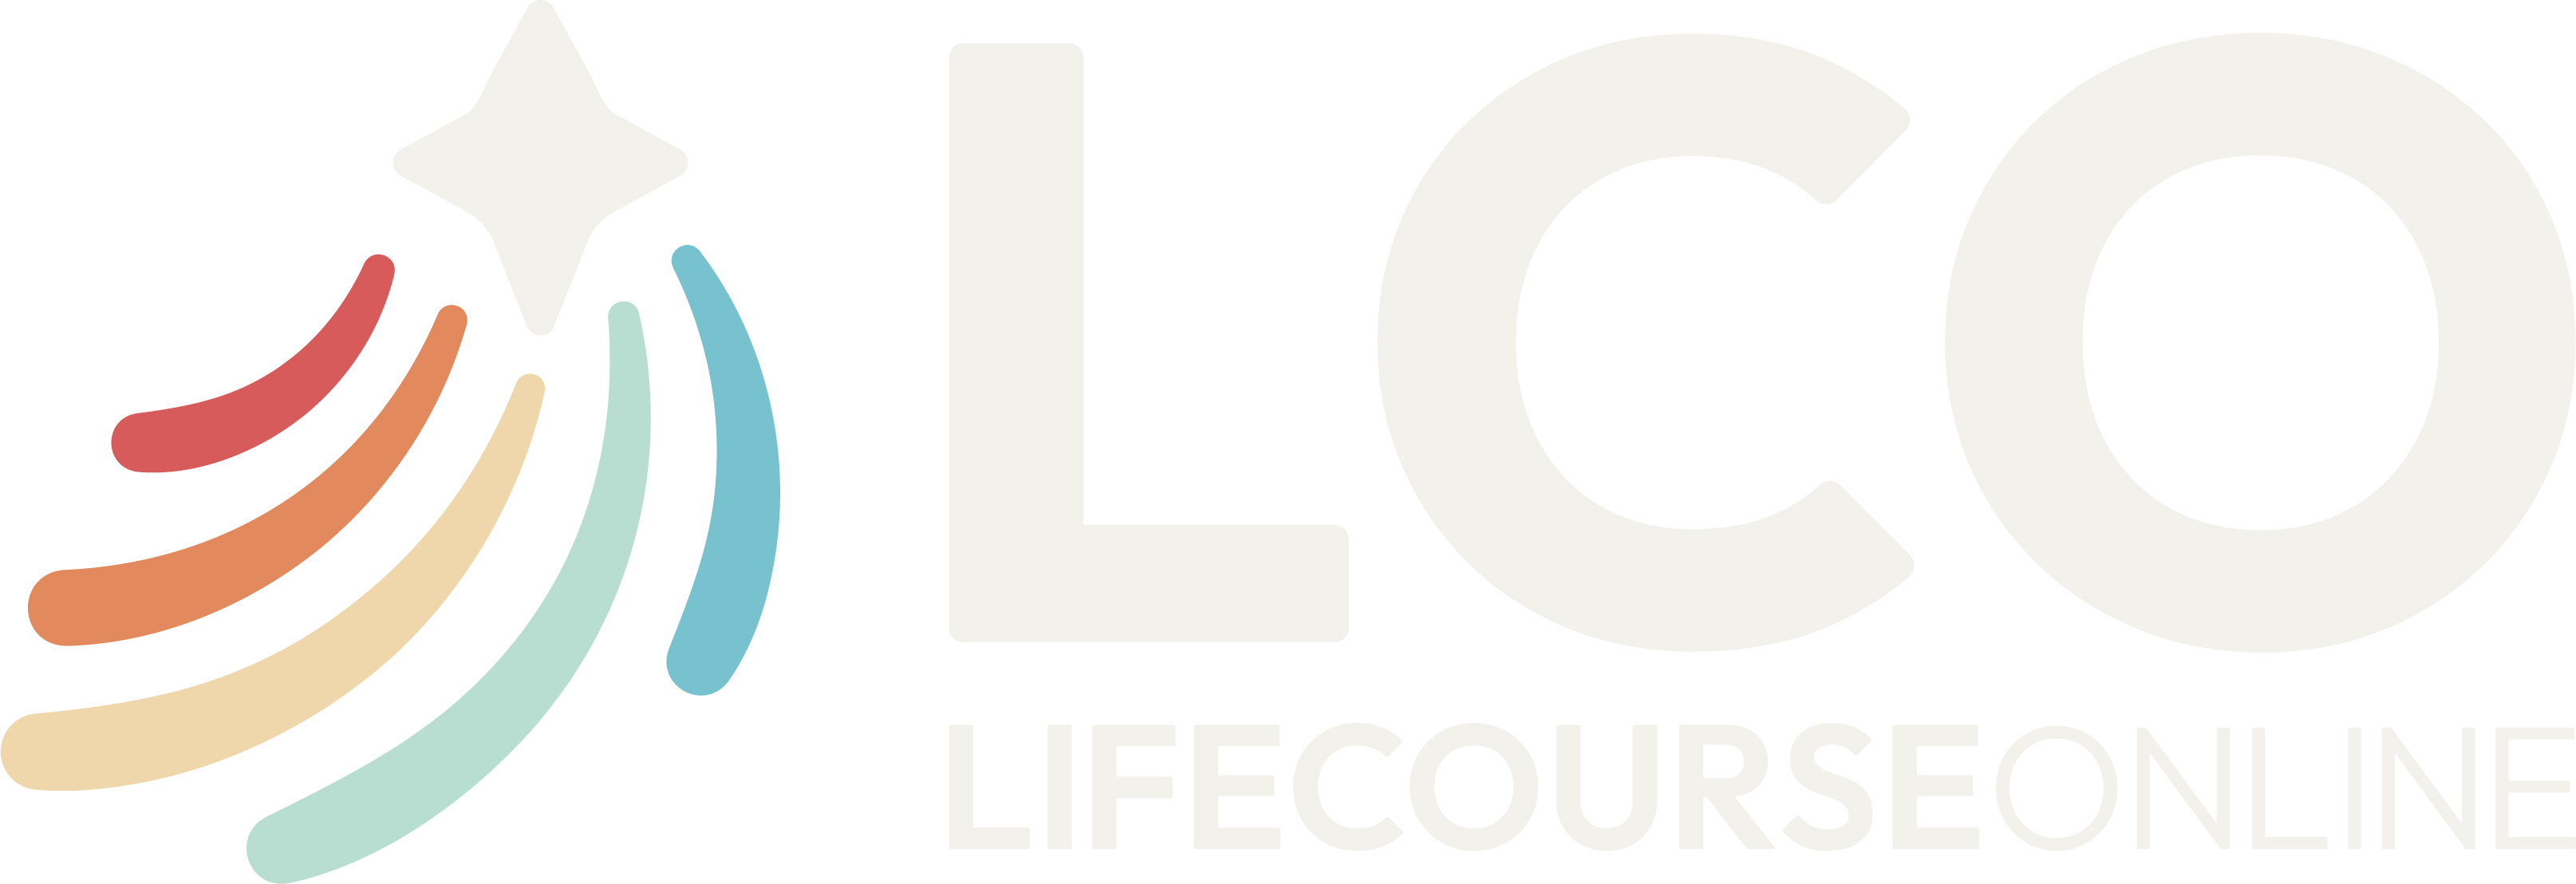 LifeCourseOnline Help Center home page